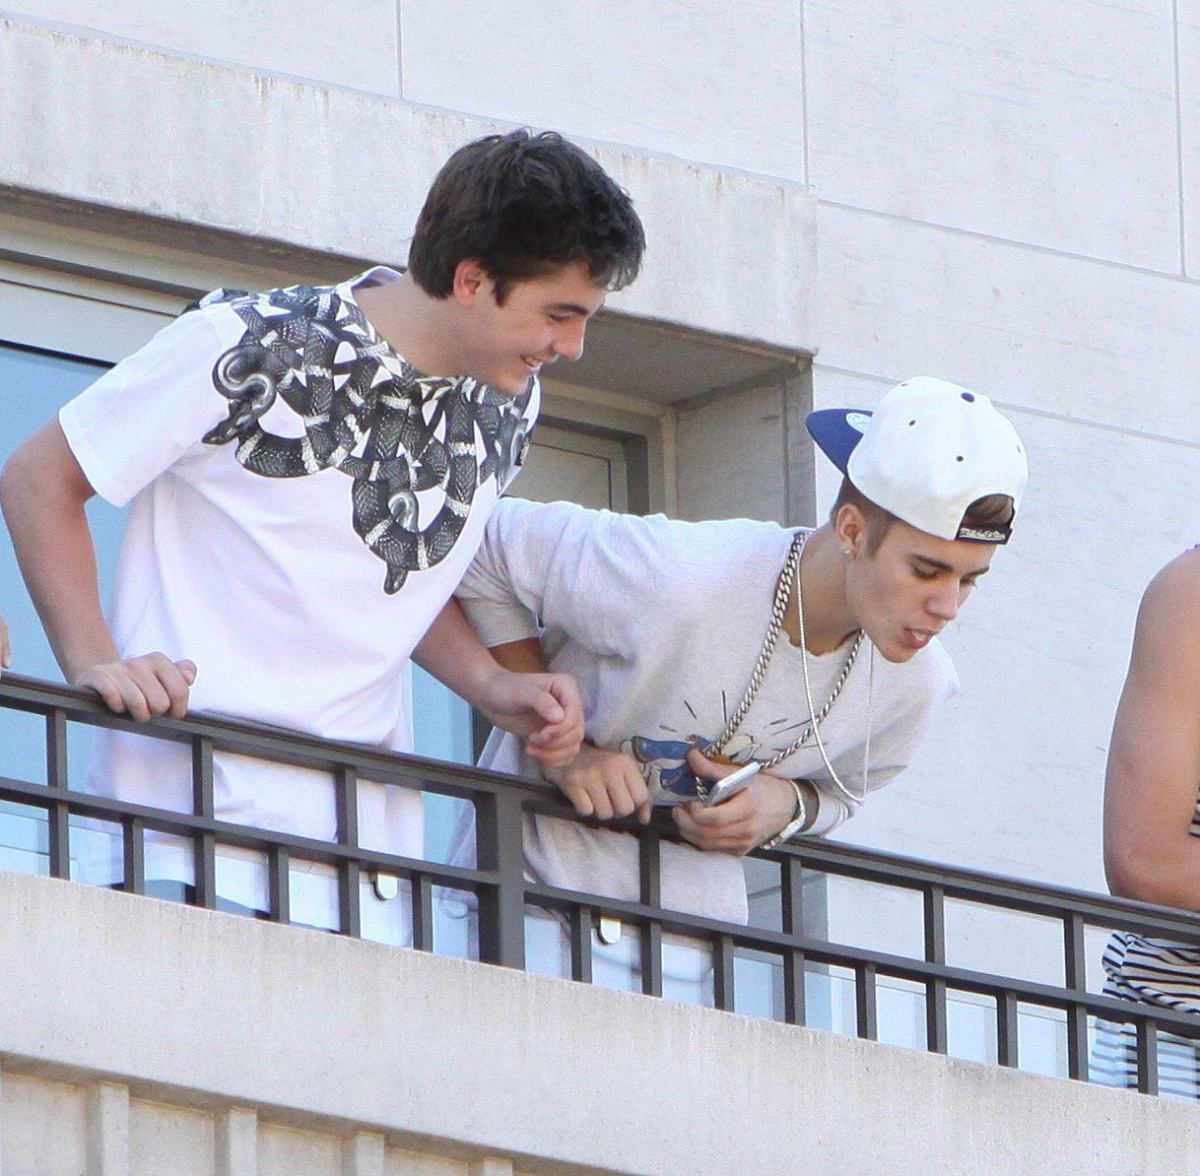 Justin Bieber spitting at people from his balcony in Toronto